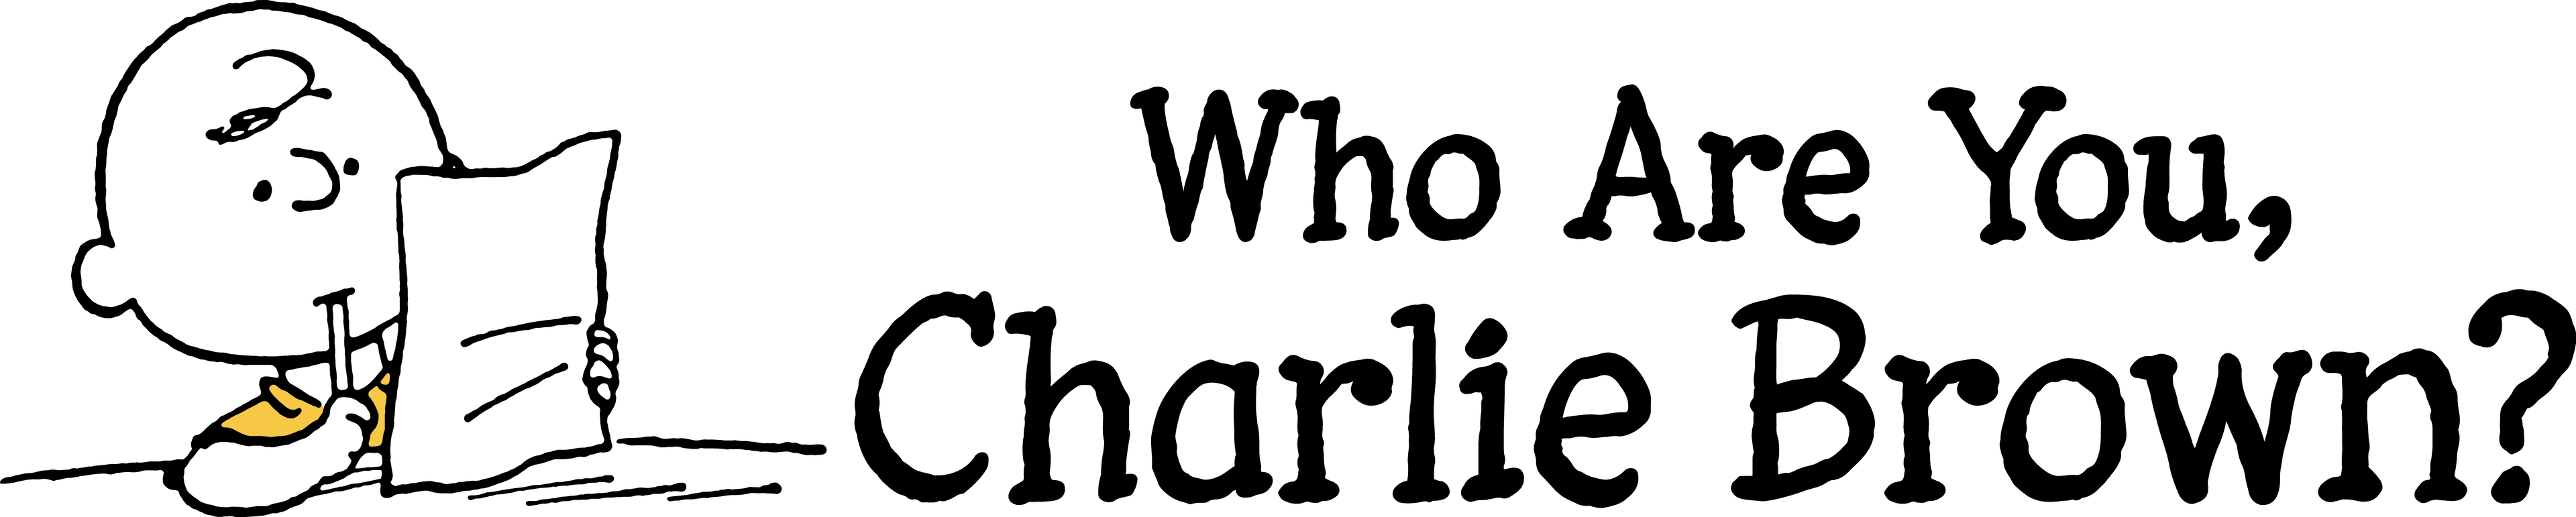 Who Are You, Charlie Brown? logo